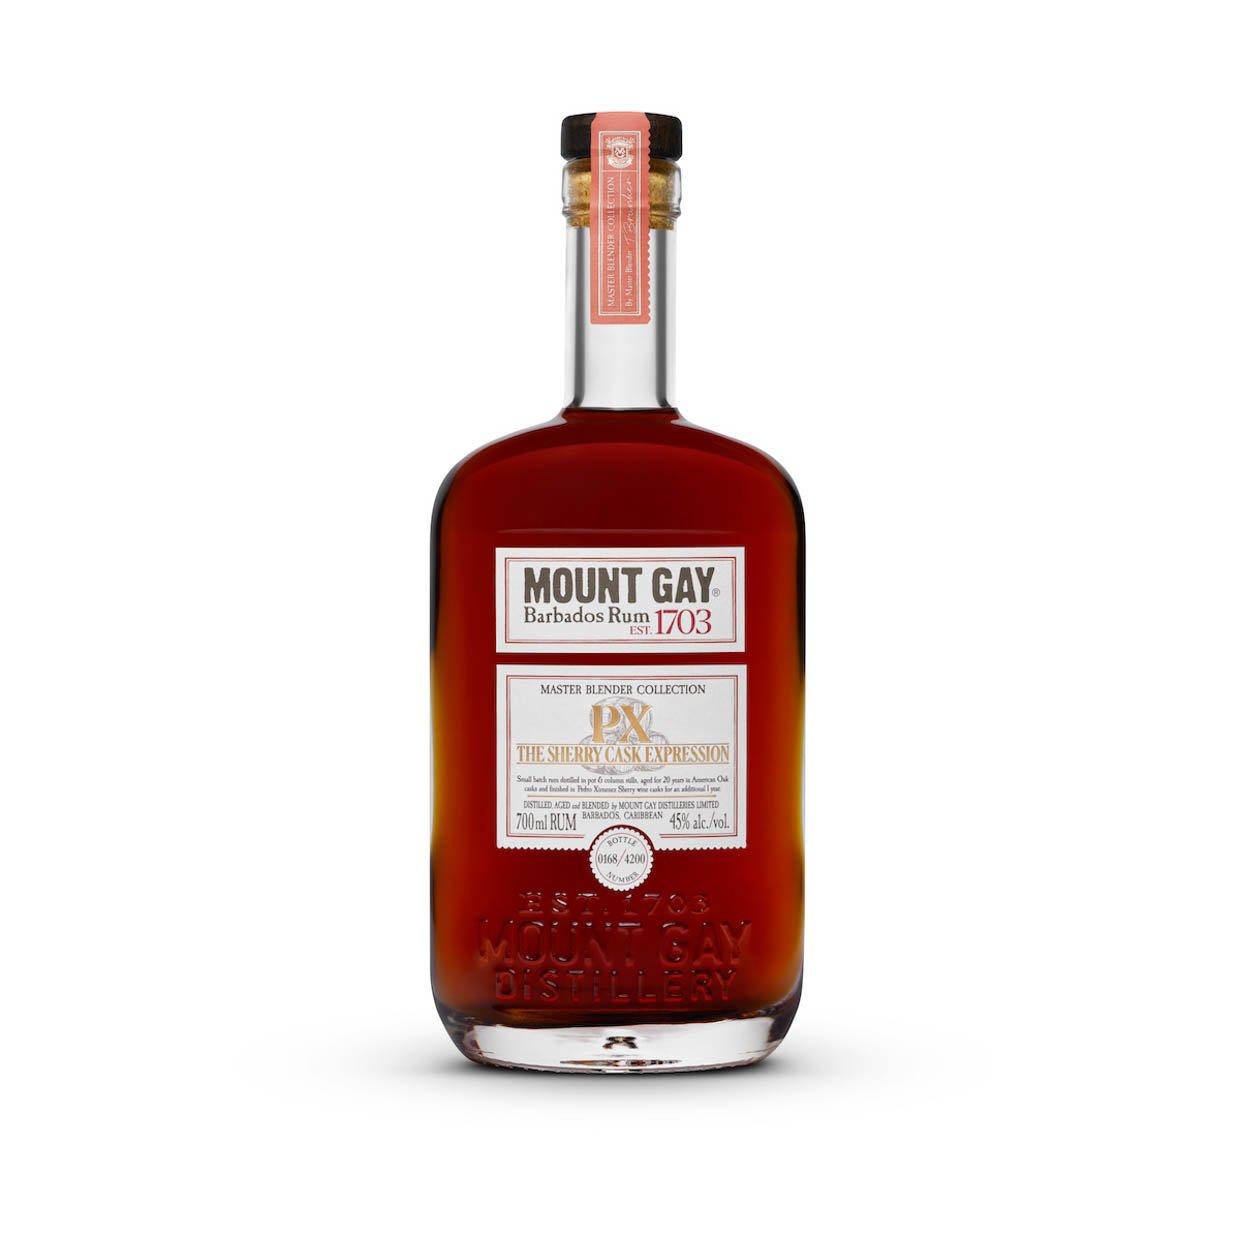 Mount Gay Rum PX Sherry Cask